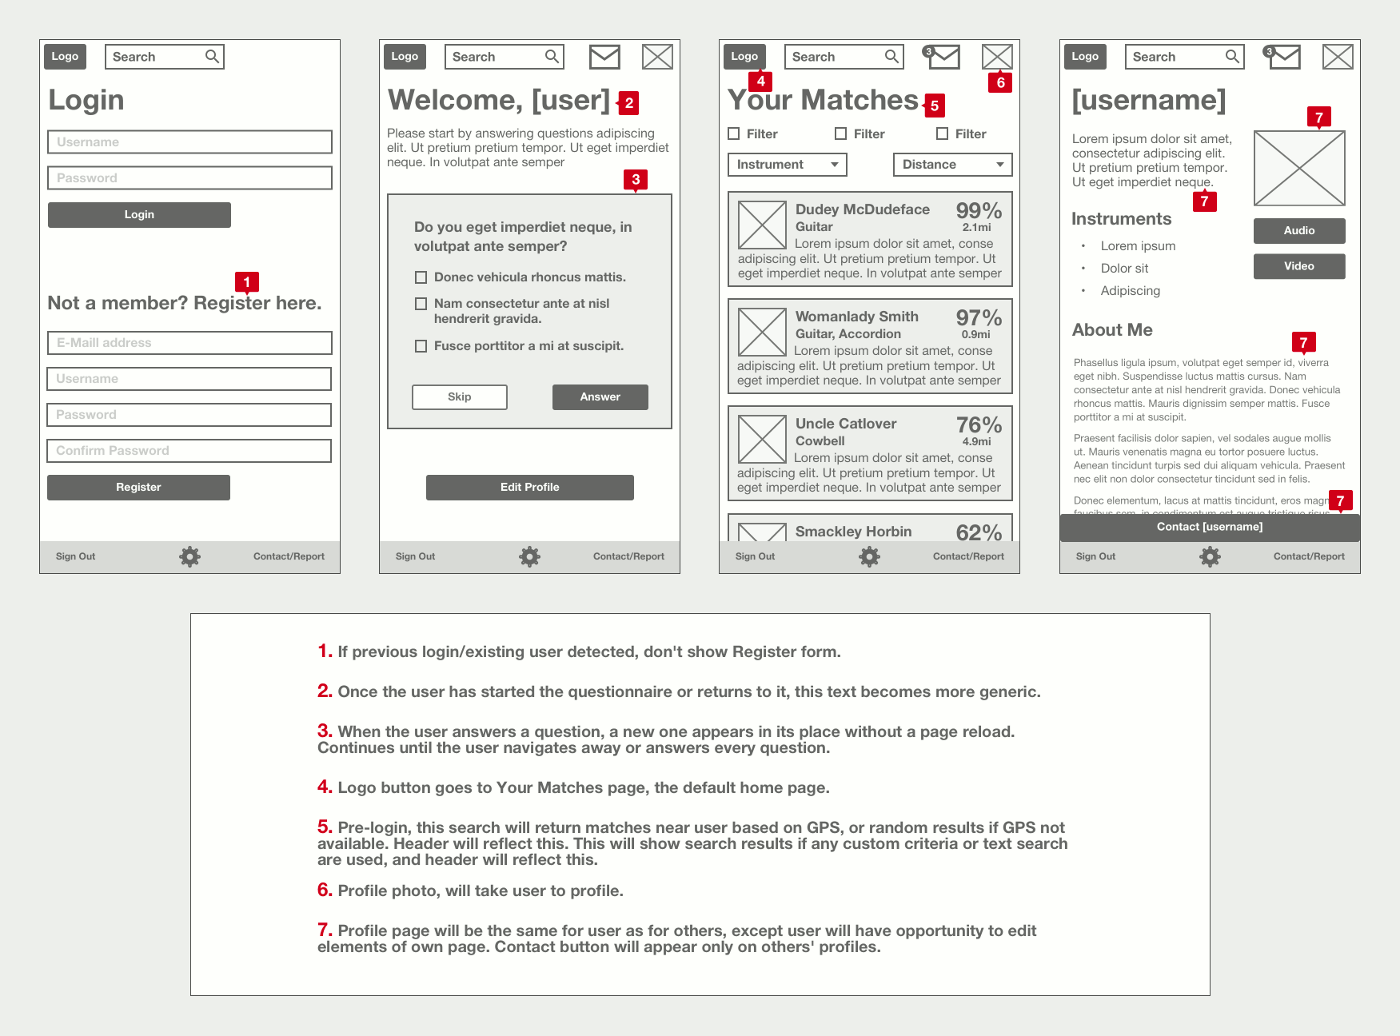 Annotated Wireframes image